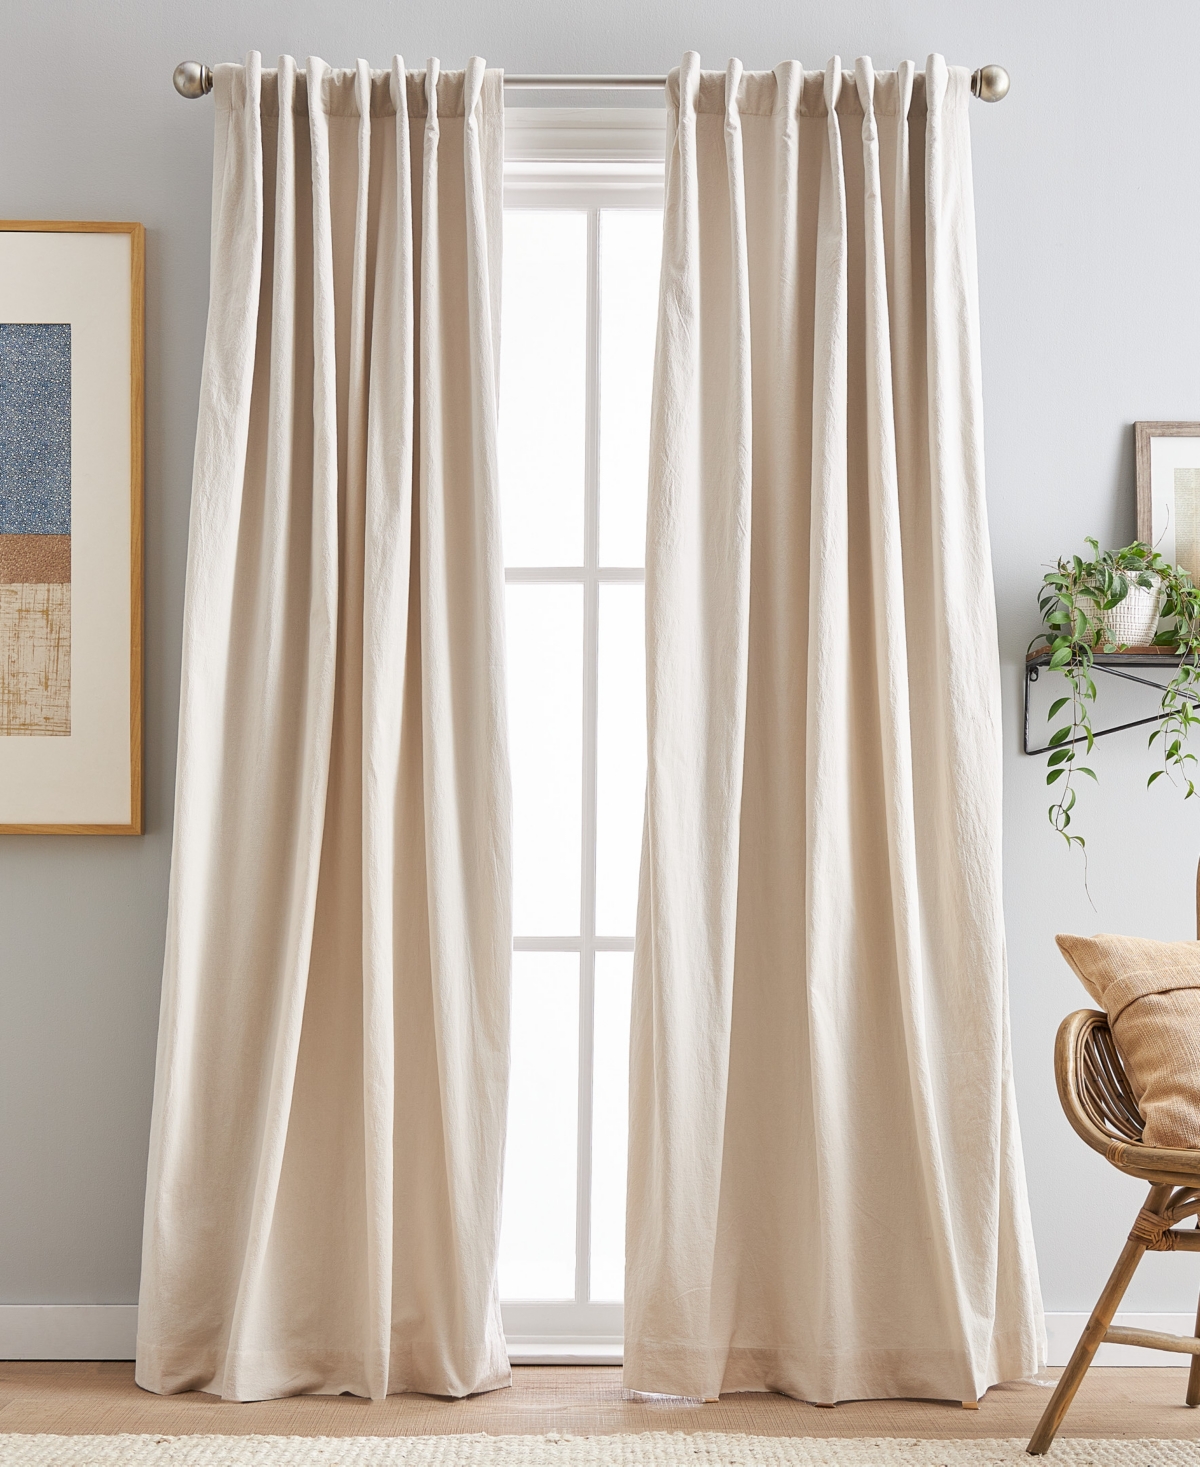 Peri Home Sanctuary Back Tab Lined 2-piece Curtain Panel Set, 50" X 95" In Linen